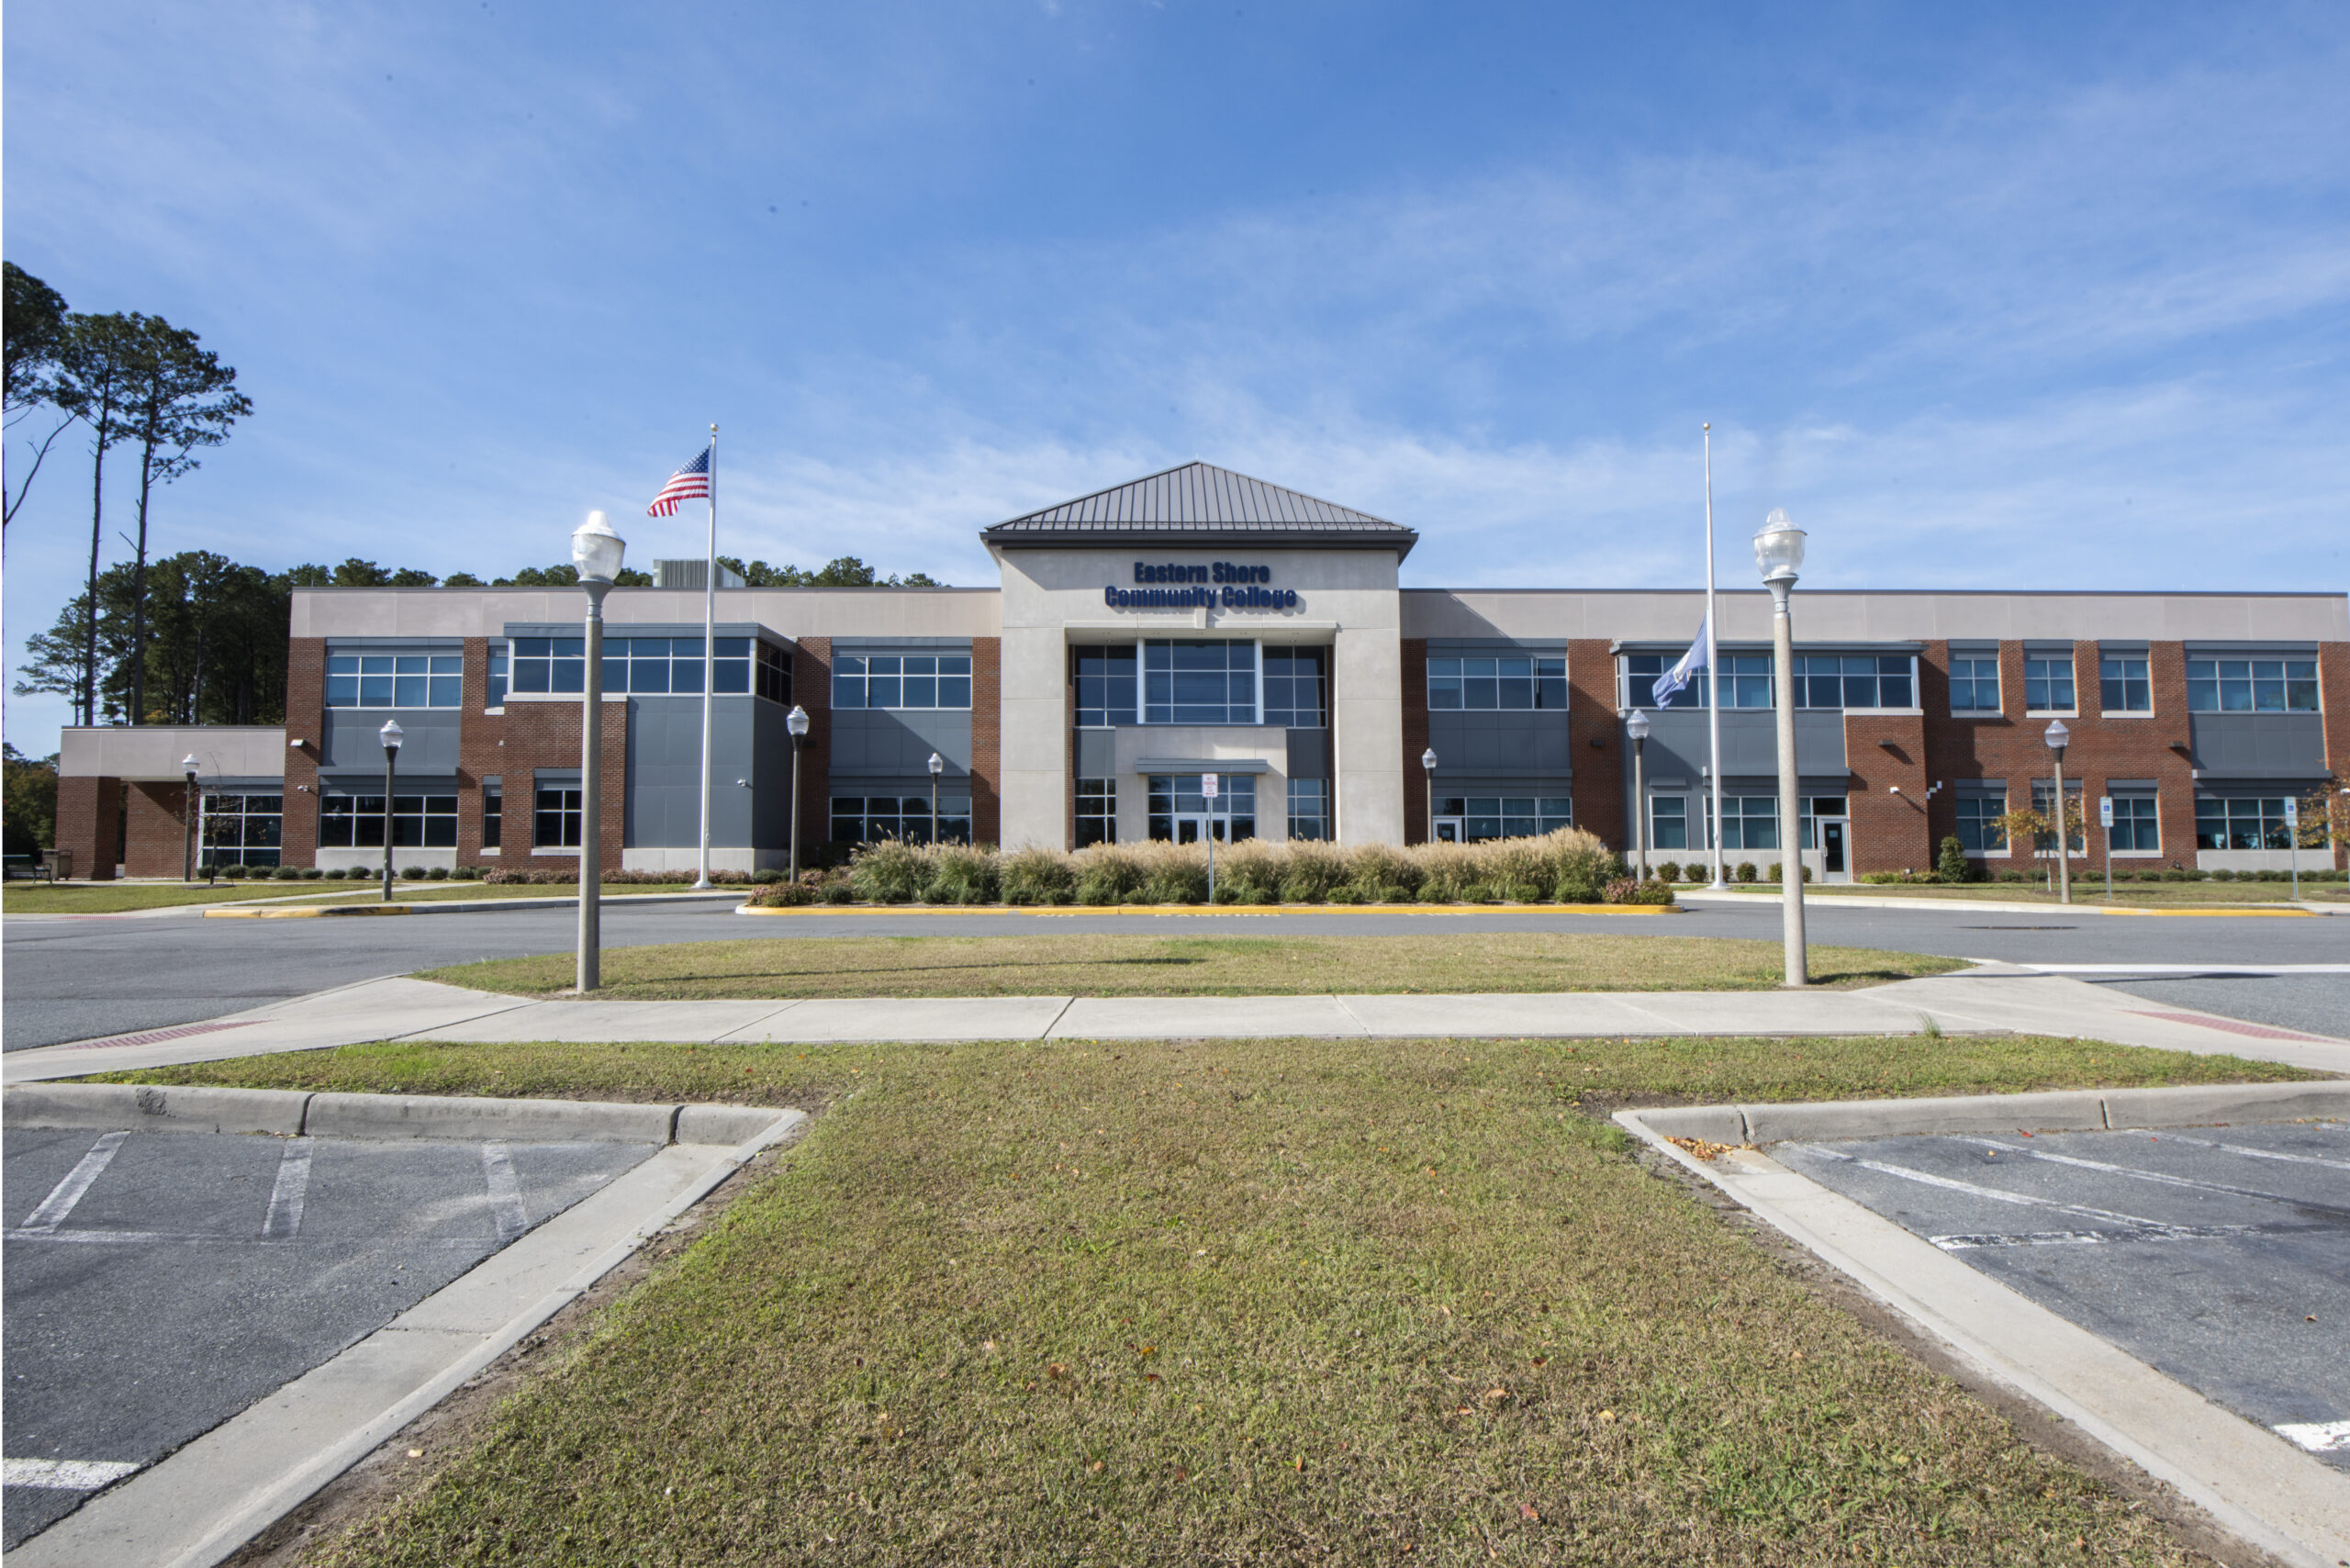 Eastern Shore Community College: Academic & Administration Building